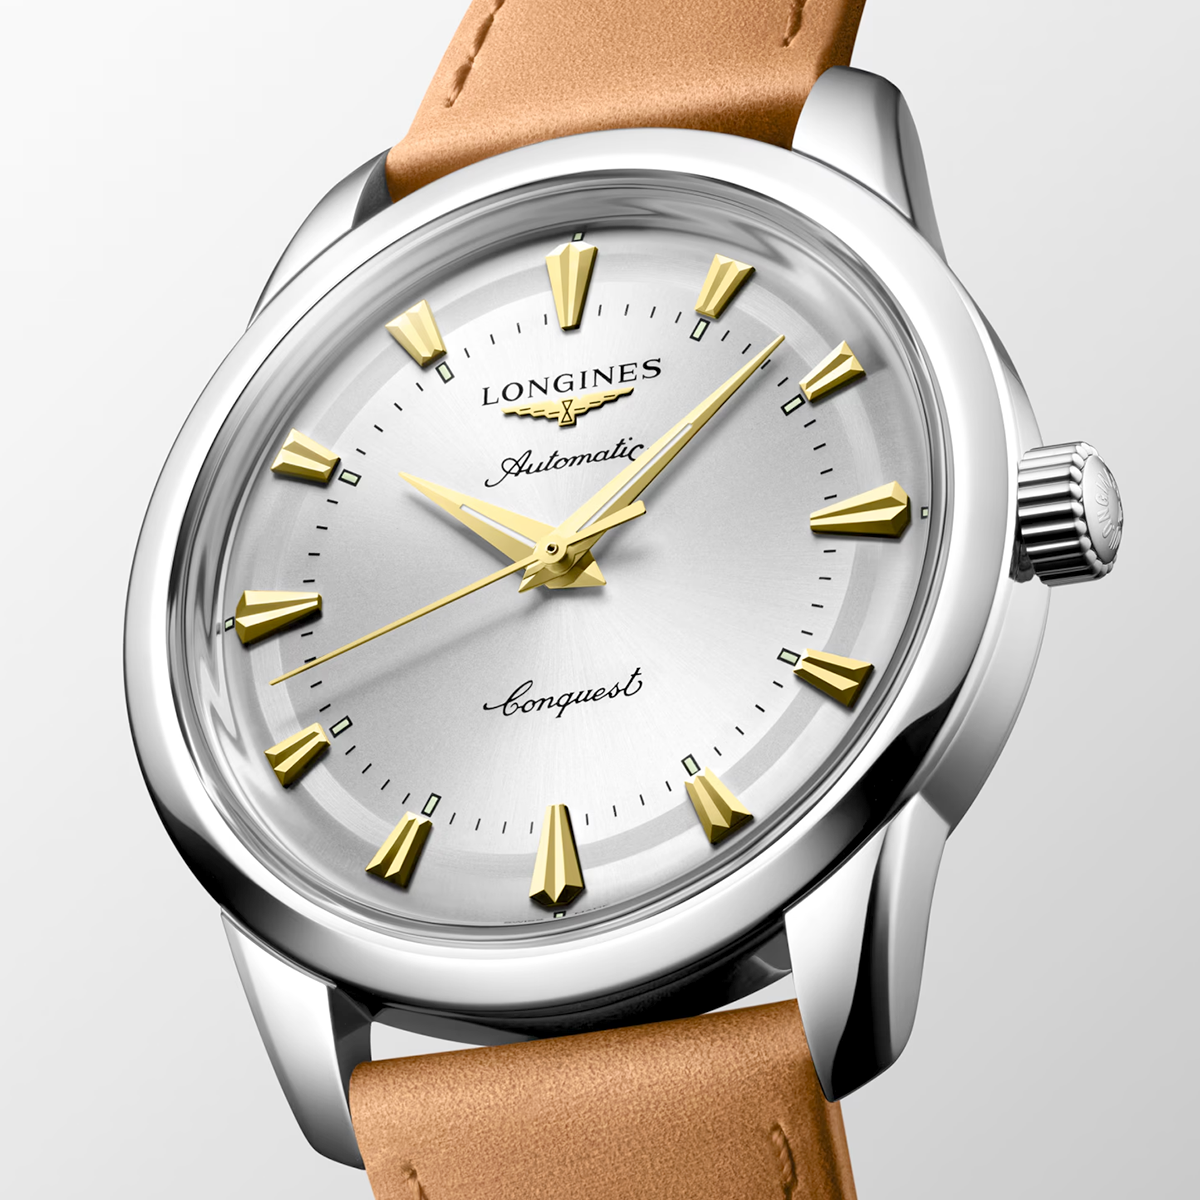 Conquest Heritage 40mm Silver/Gold Dial Automatic Strap Watch